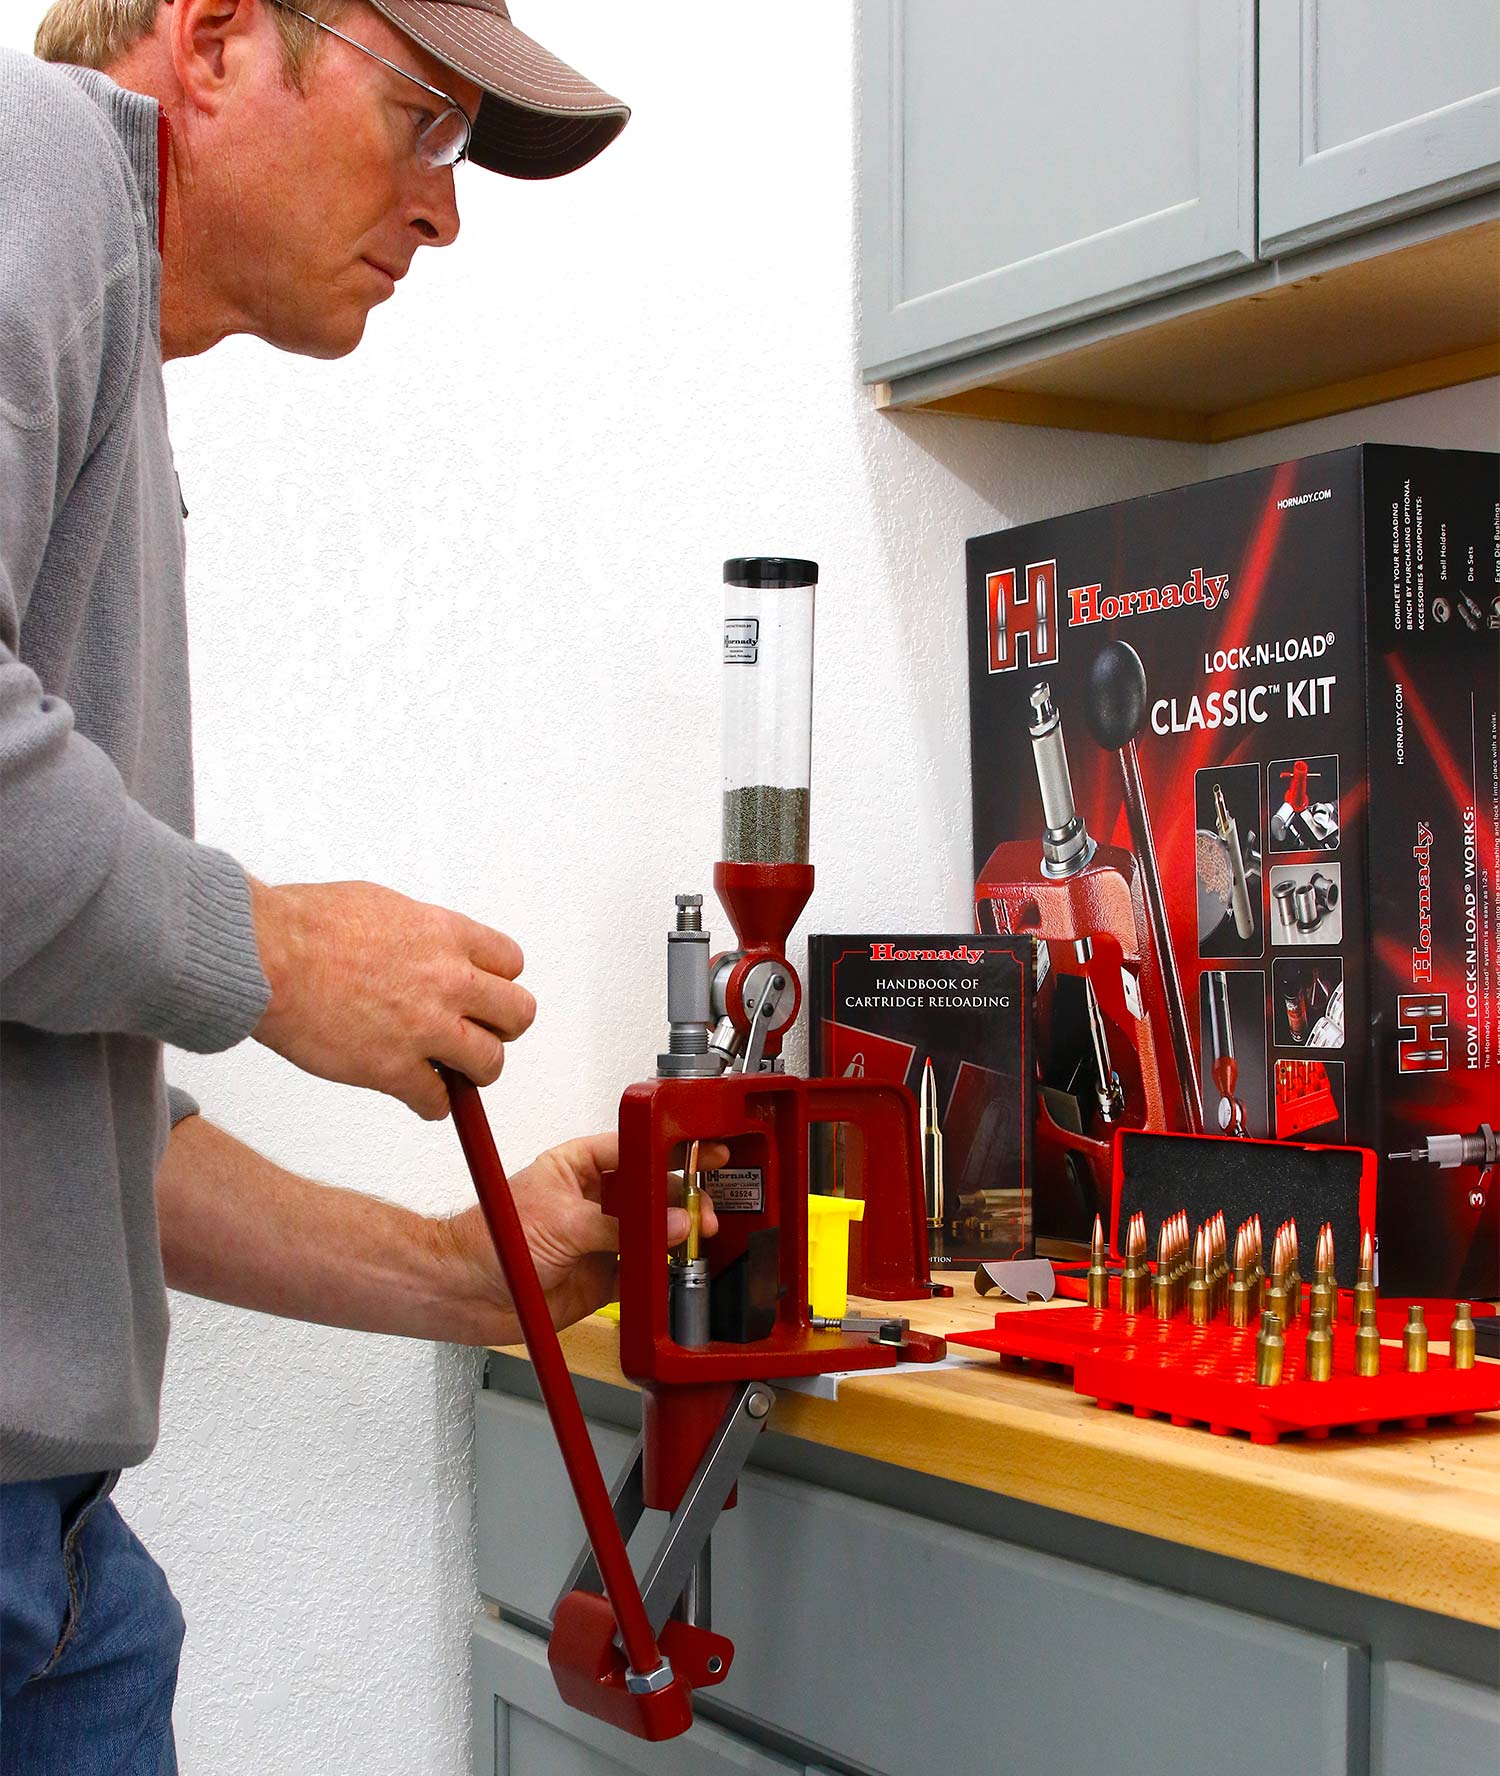 A man operates a custom handloading machine designed for dropping gunpowder into small cyclinders of rifle ammunition cartridges.